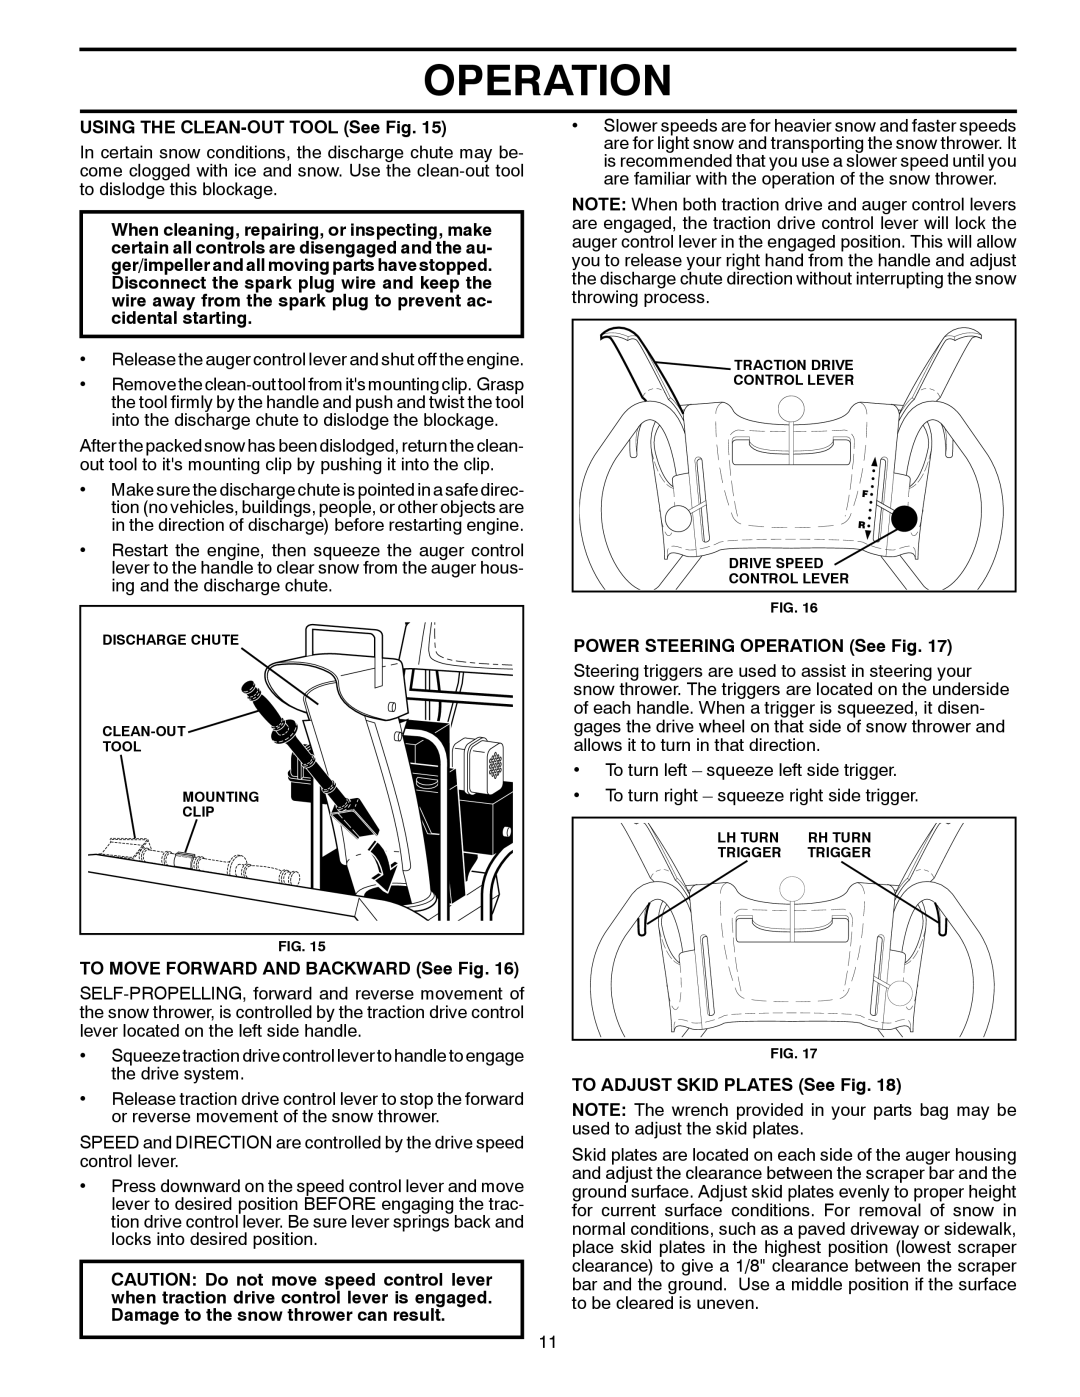 Husqvarna 10527SB-LS owner manual Operation, USING THE CLEAN-OUT TOOL See Fig, TO MOVE FORWARD AND BACKWARD See Fig 